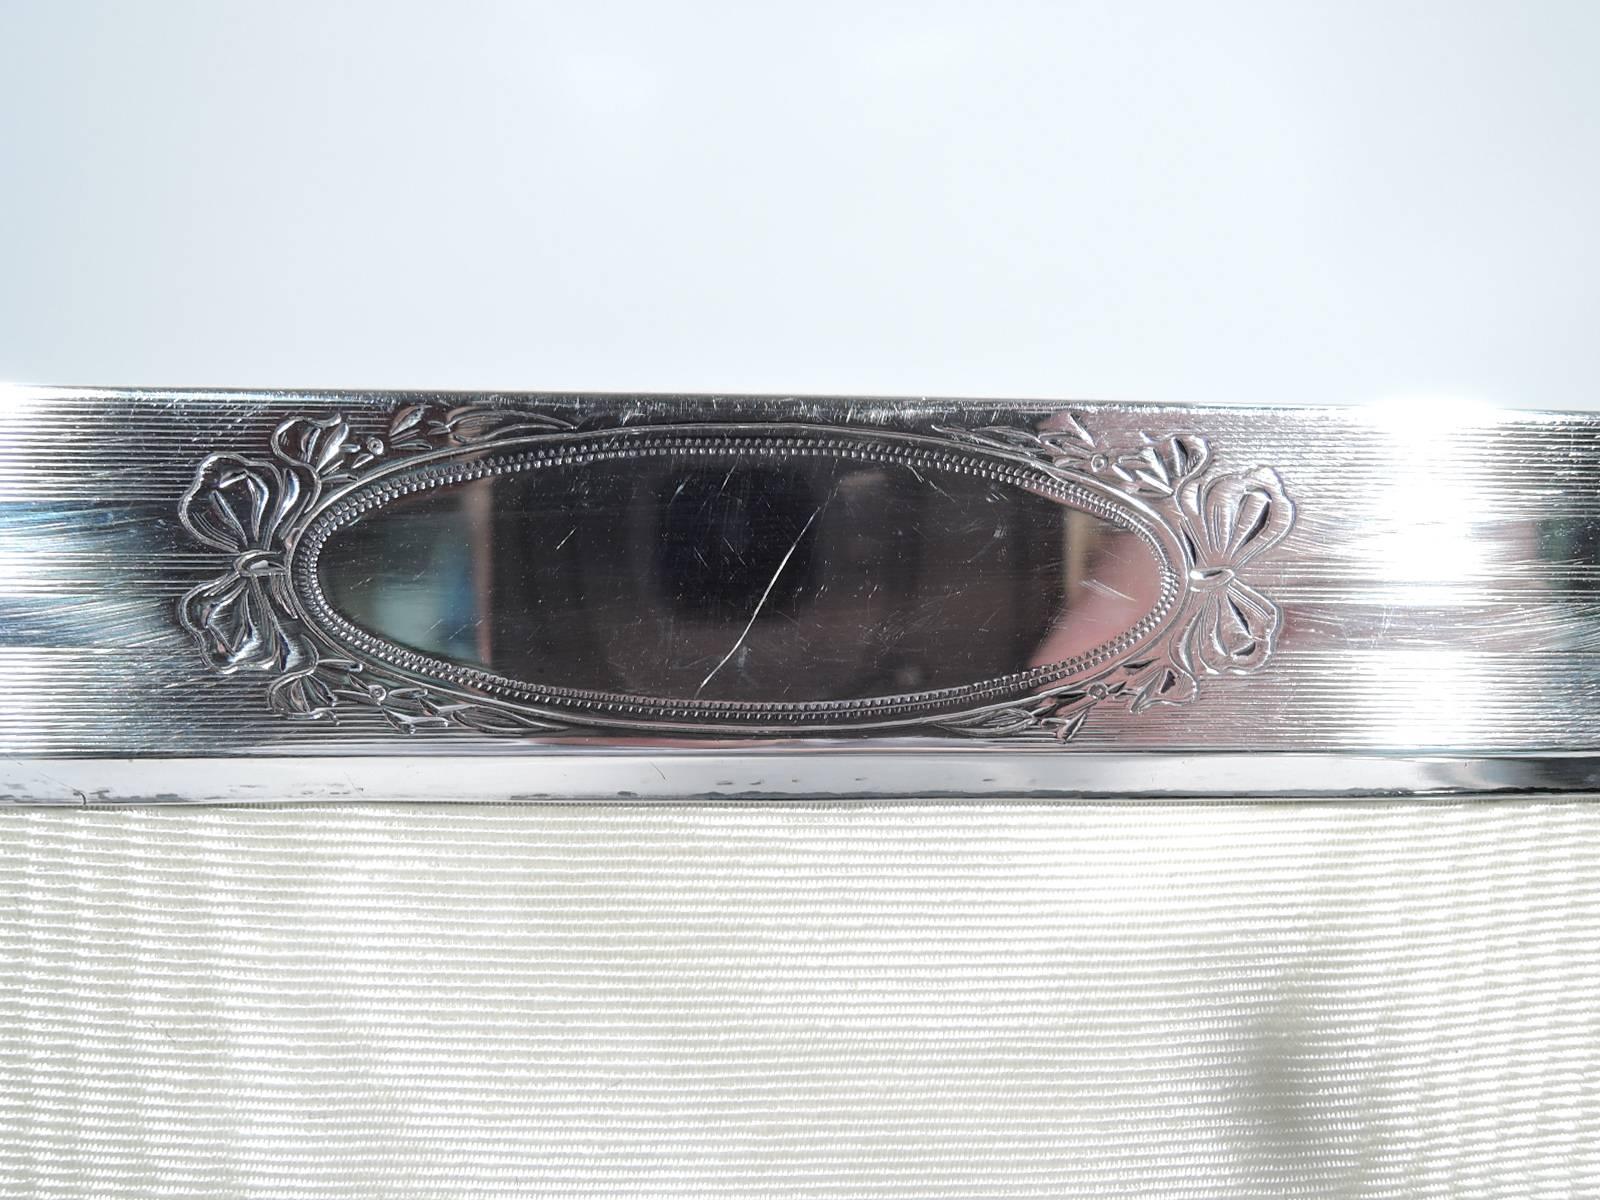 Edwardian sterling silver picture frame. Made by Webster in North Attleboro, Mass., circa 1915. Rectangular window bordered by wraparound lines of varying width. At top beribboned oval (vacant). Nice period look. With glass, silk lining, and velvet